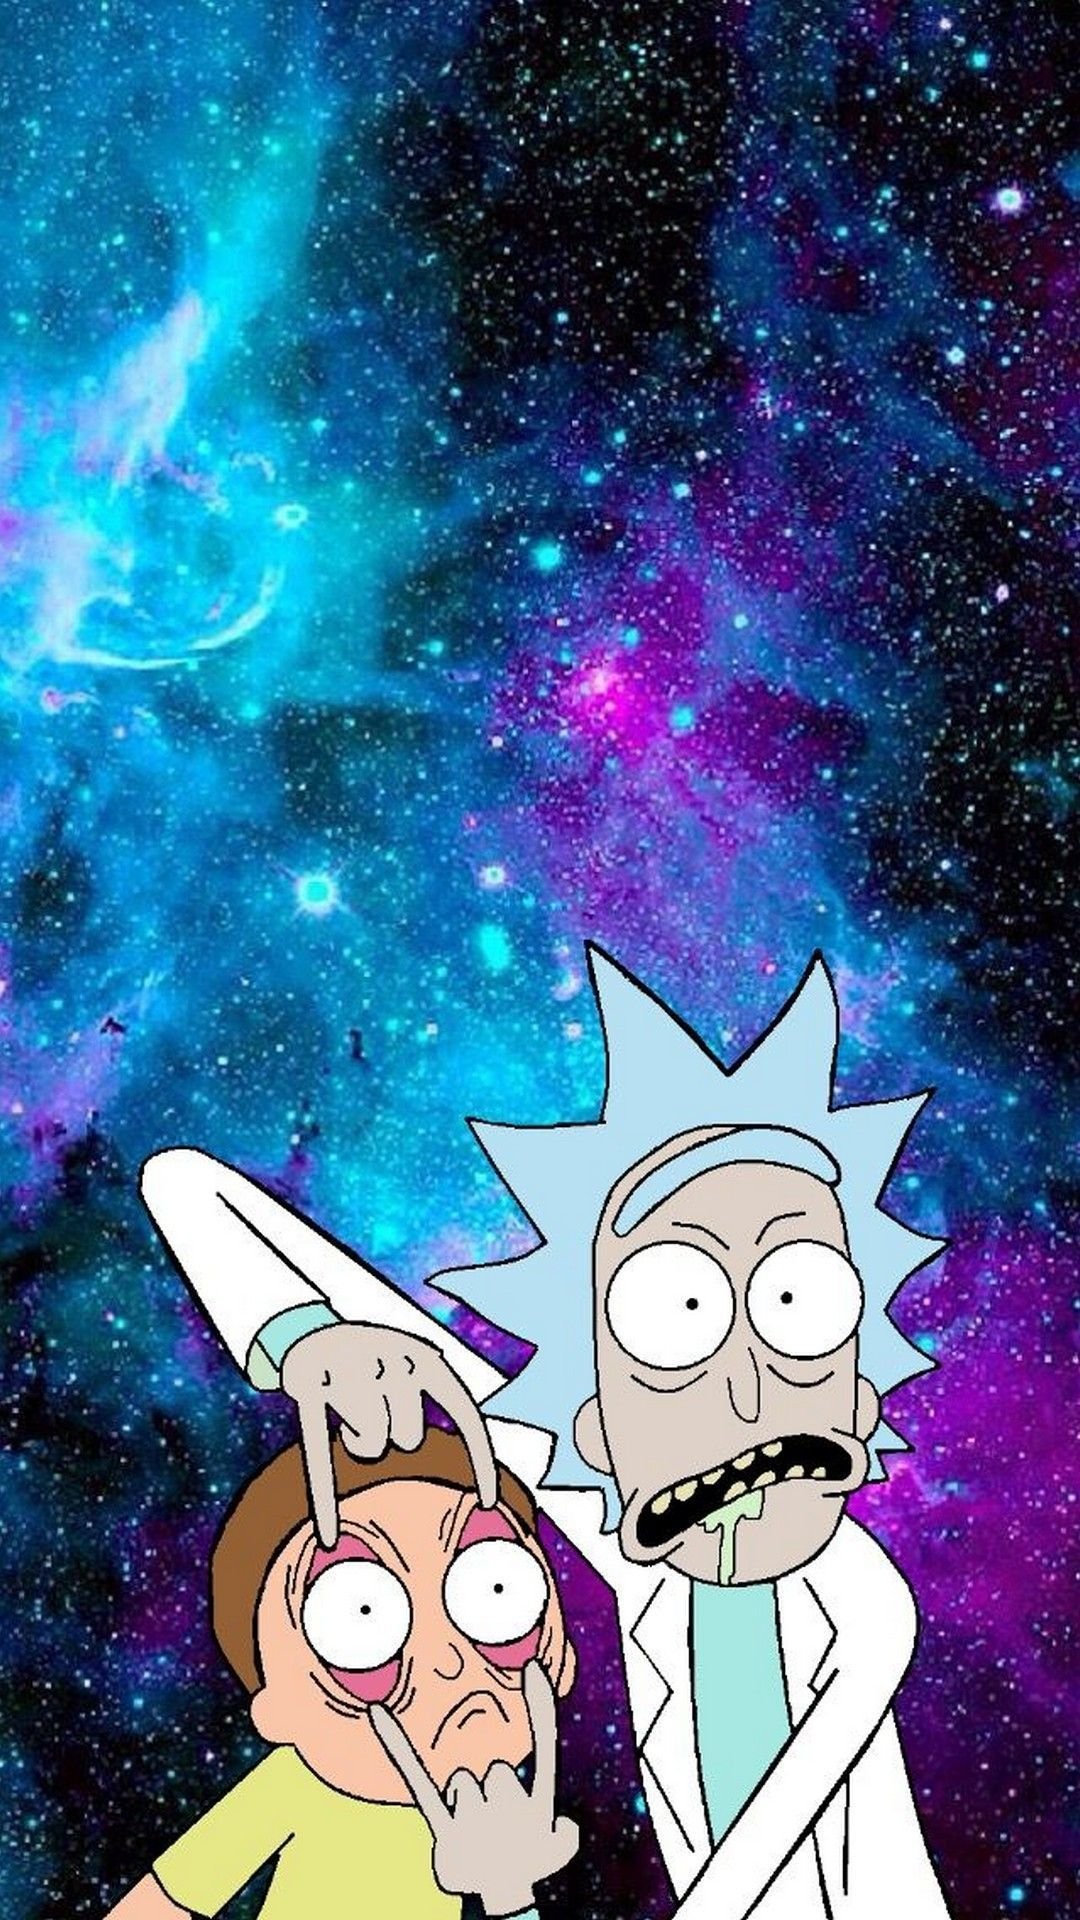 Trippy Rick And Morty, Dope Rick and Morty HD wallpaper